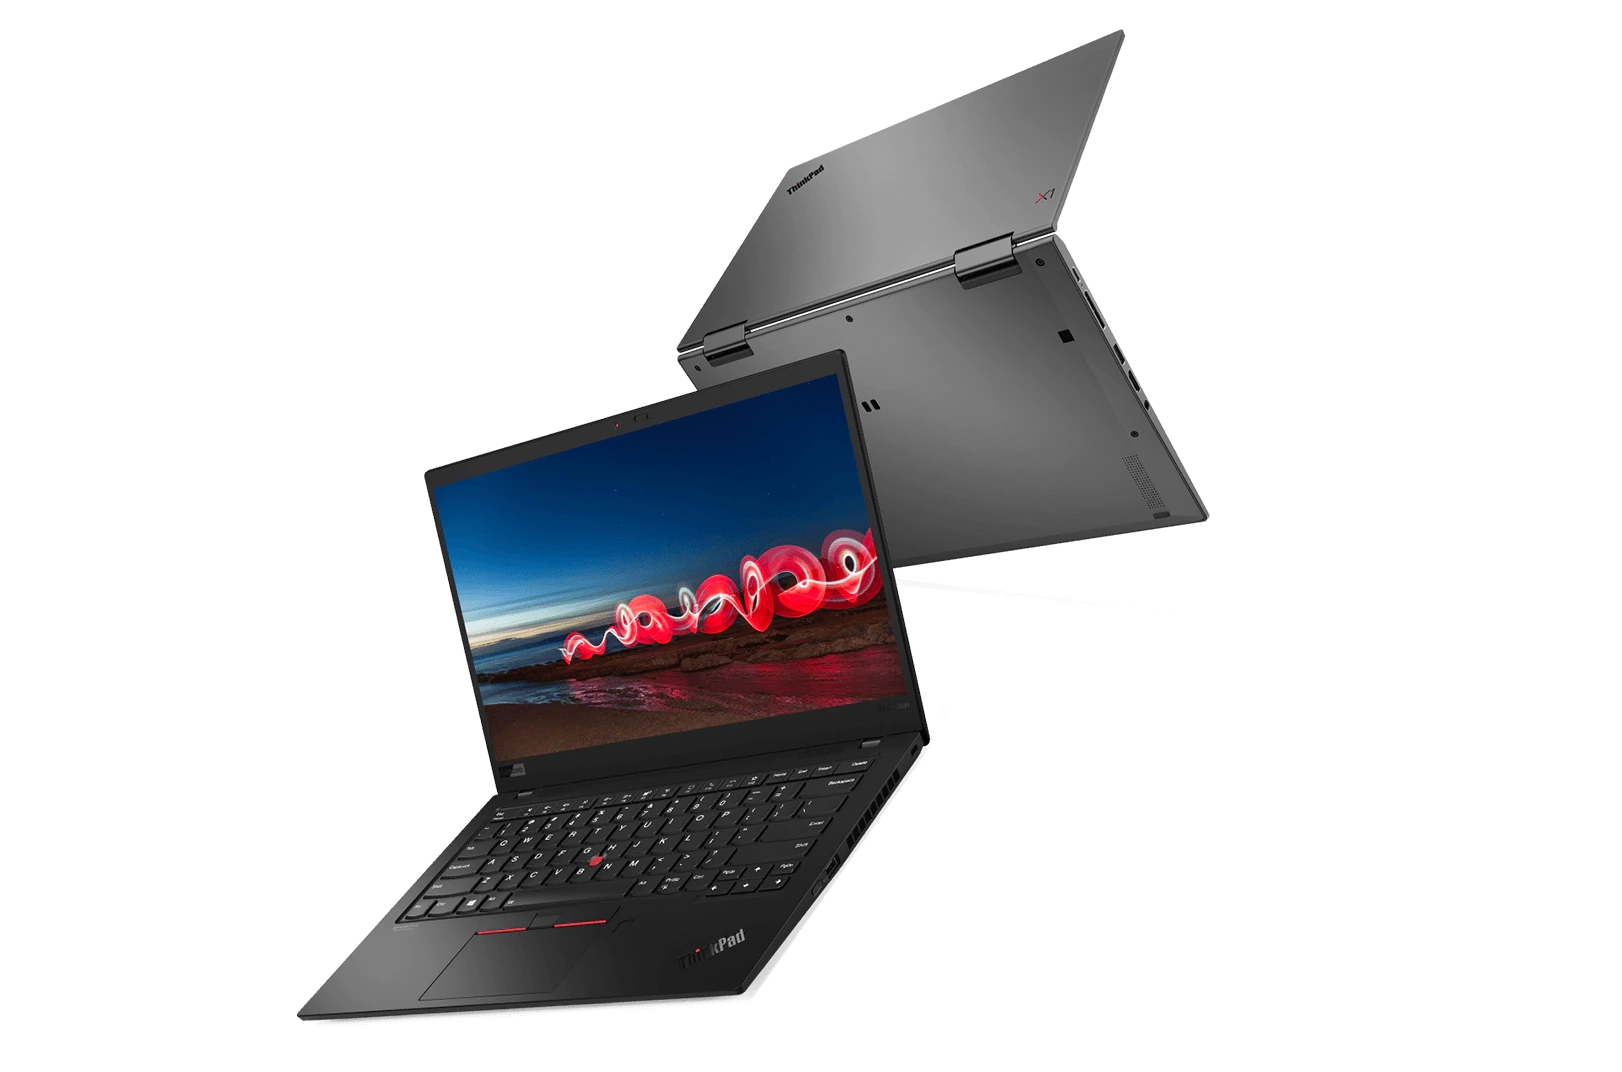 Two ThinkPad X1 Carbon laptops